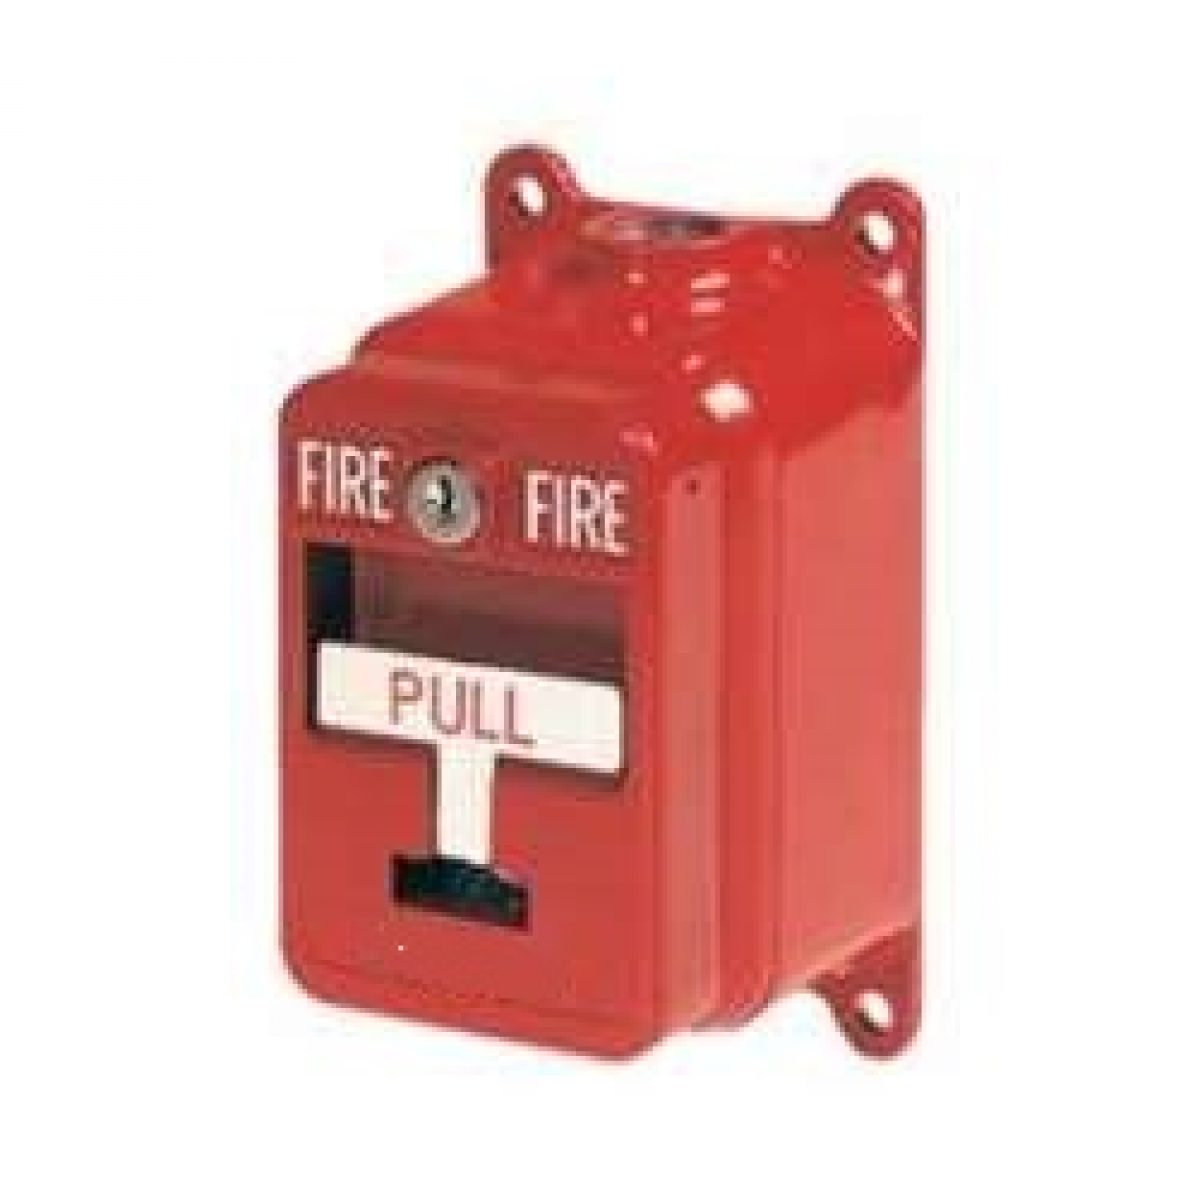 NEW SIMPLEX 4099-9006 MANUAL FIRE ALARM DUAL ACTION PULL STATION 